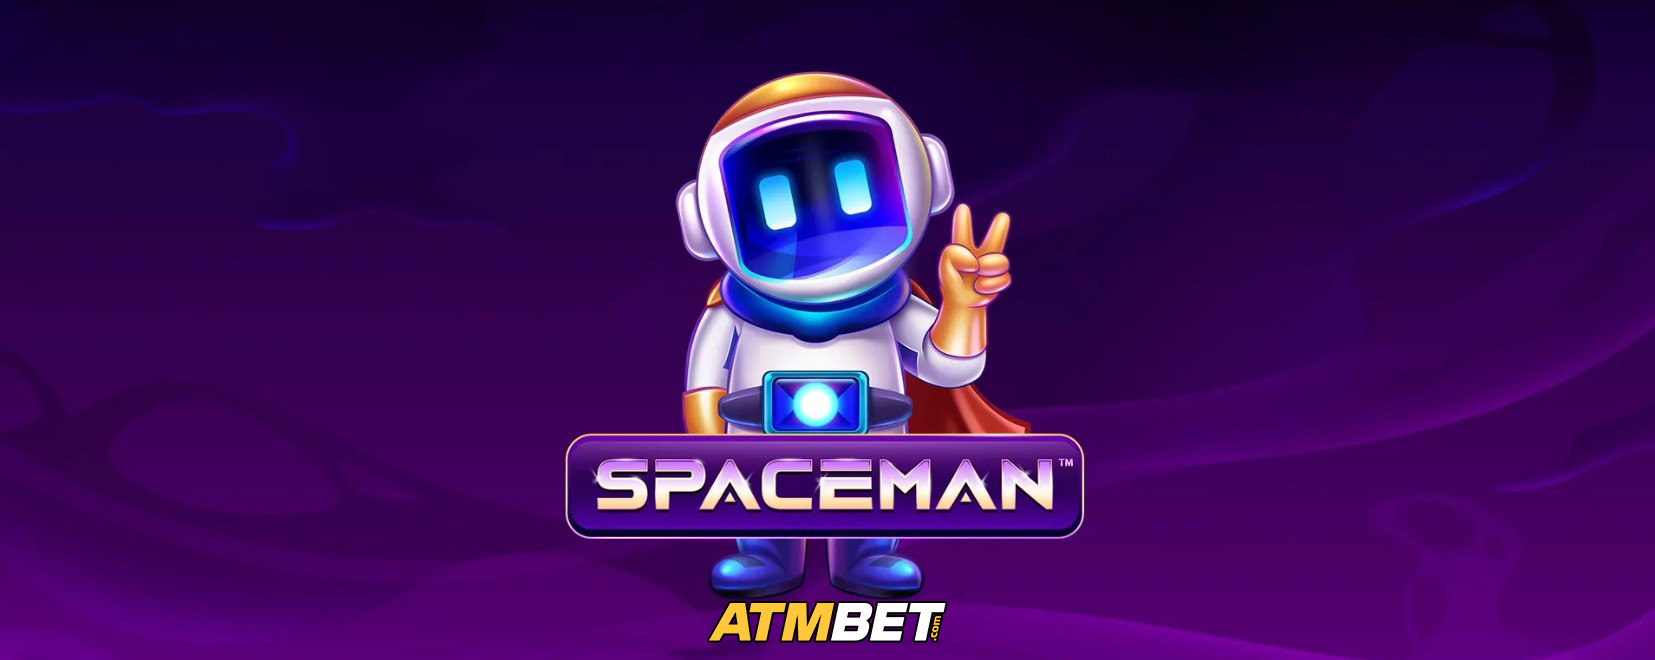 Spaceman with logo 4